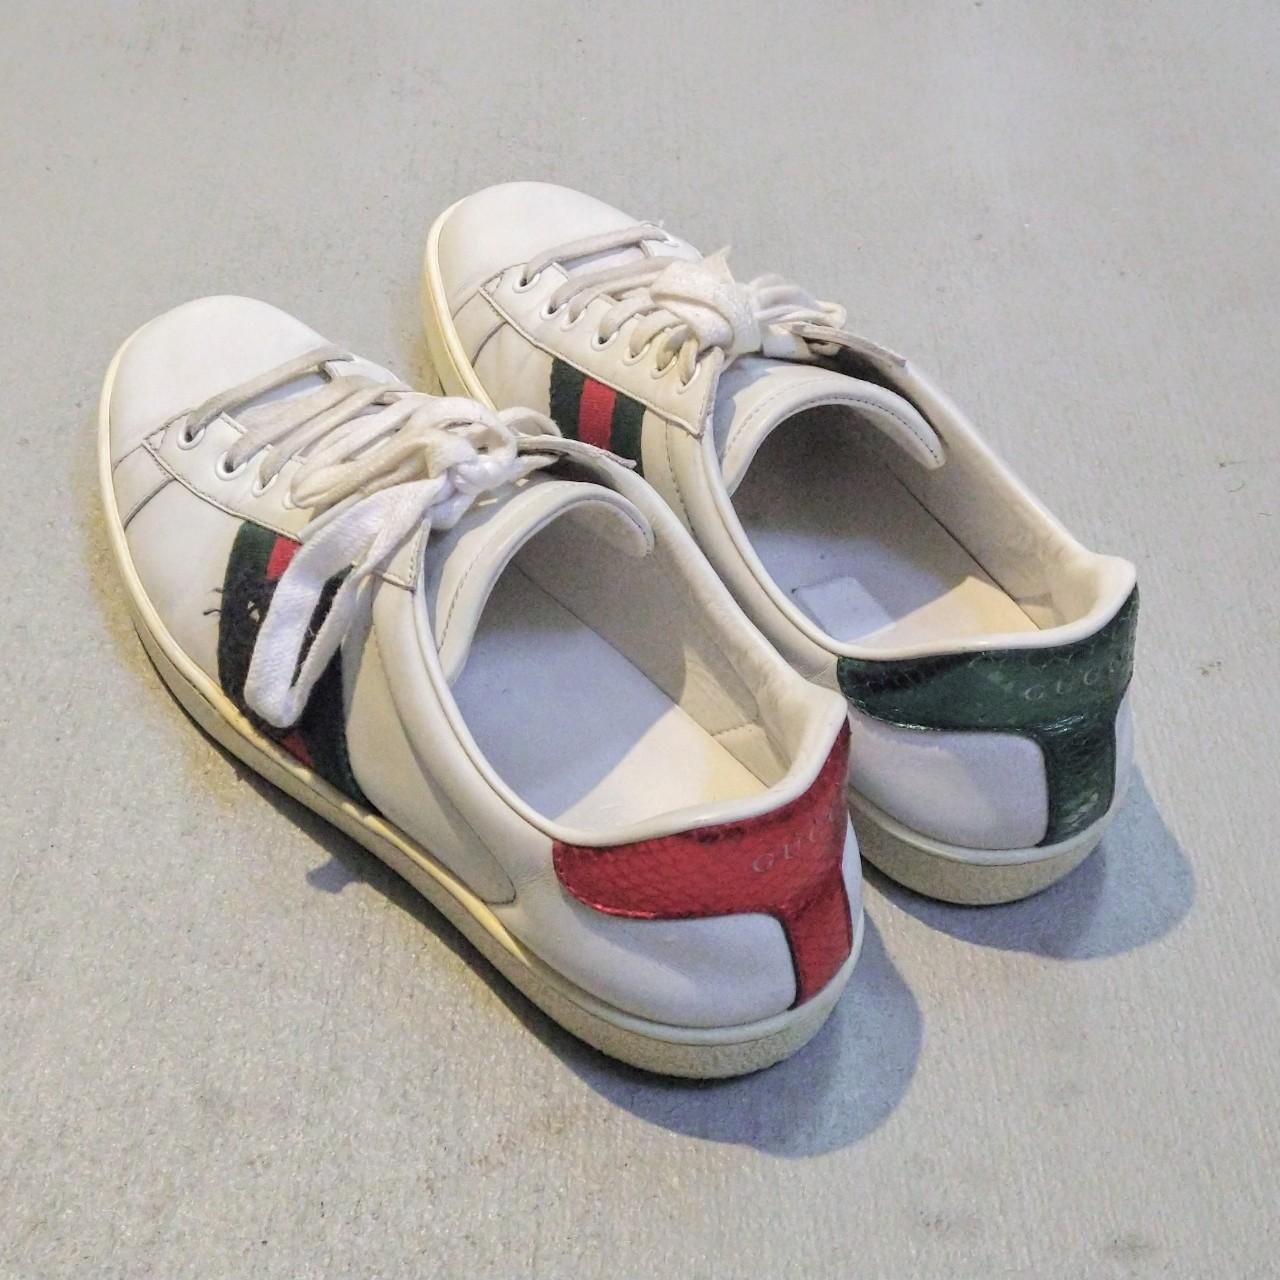 Gucci Ace Panther Sneakers 457131 100%... - Depop